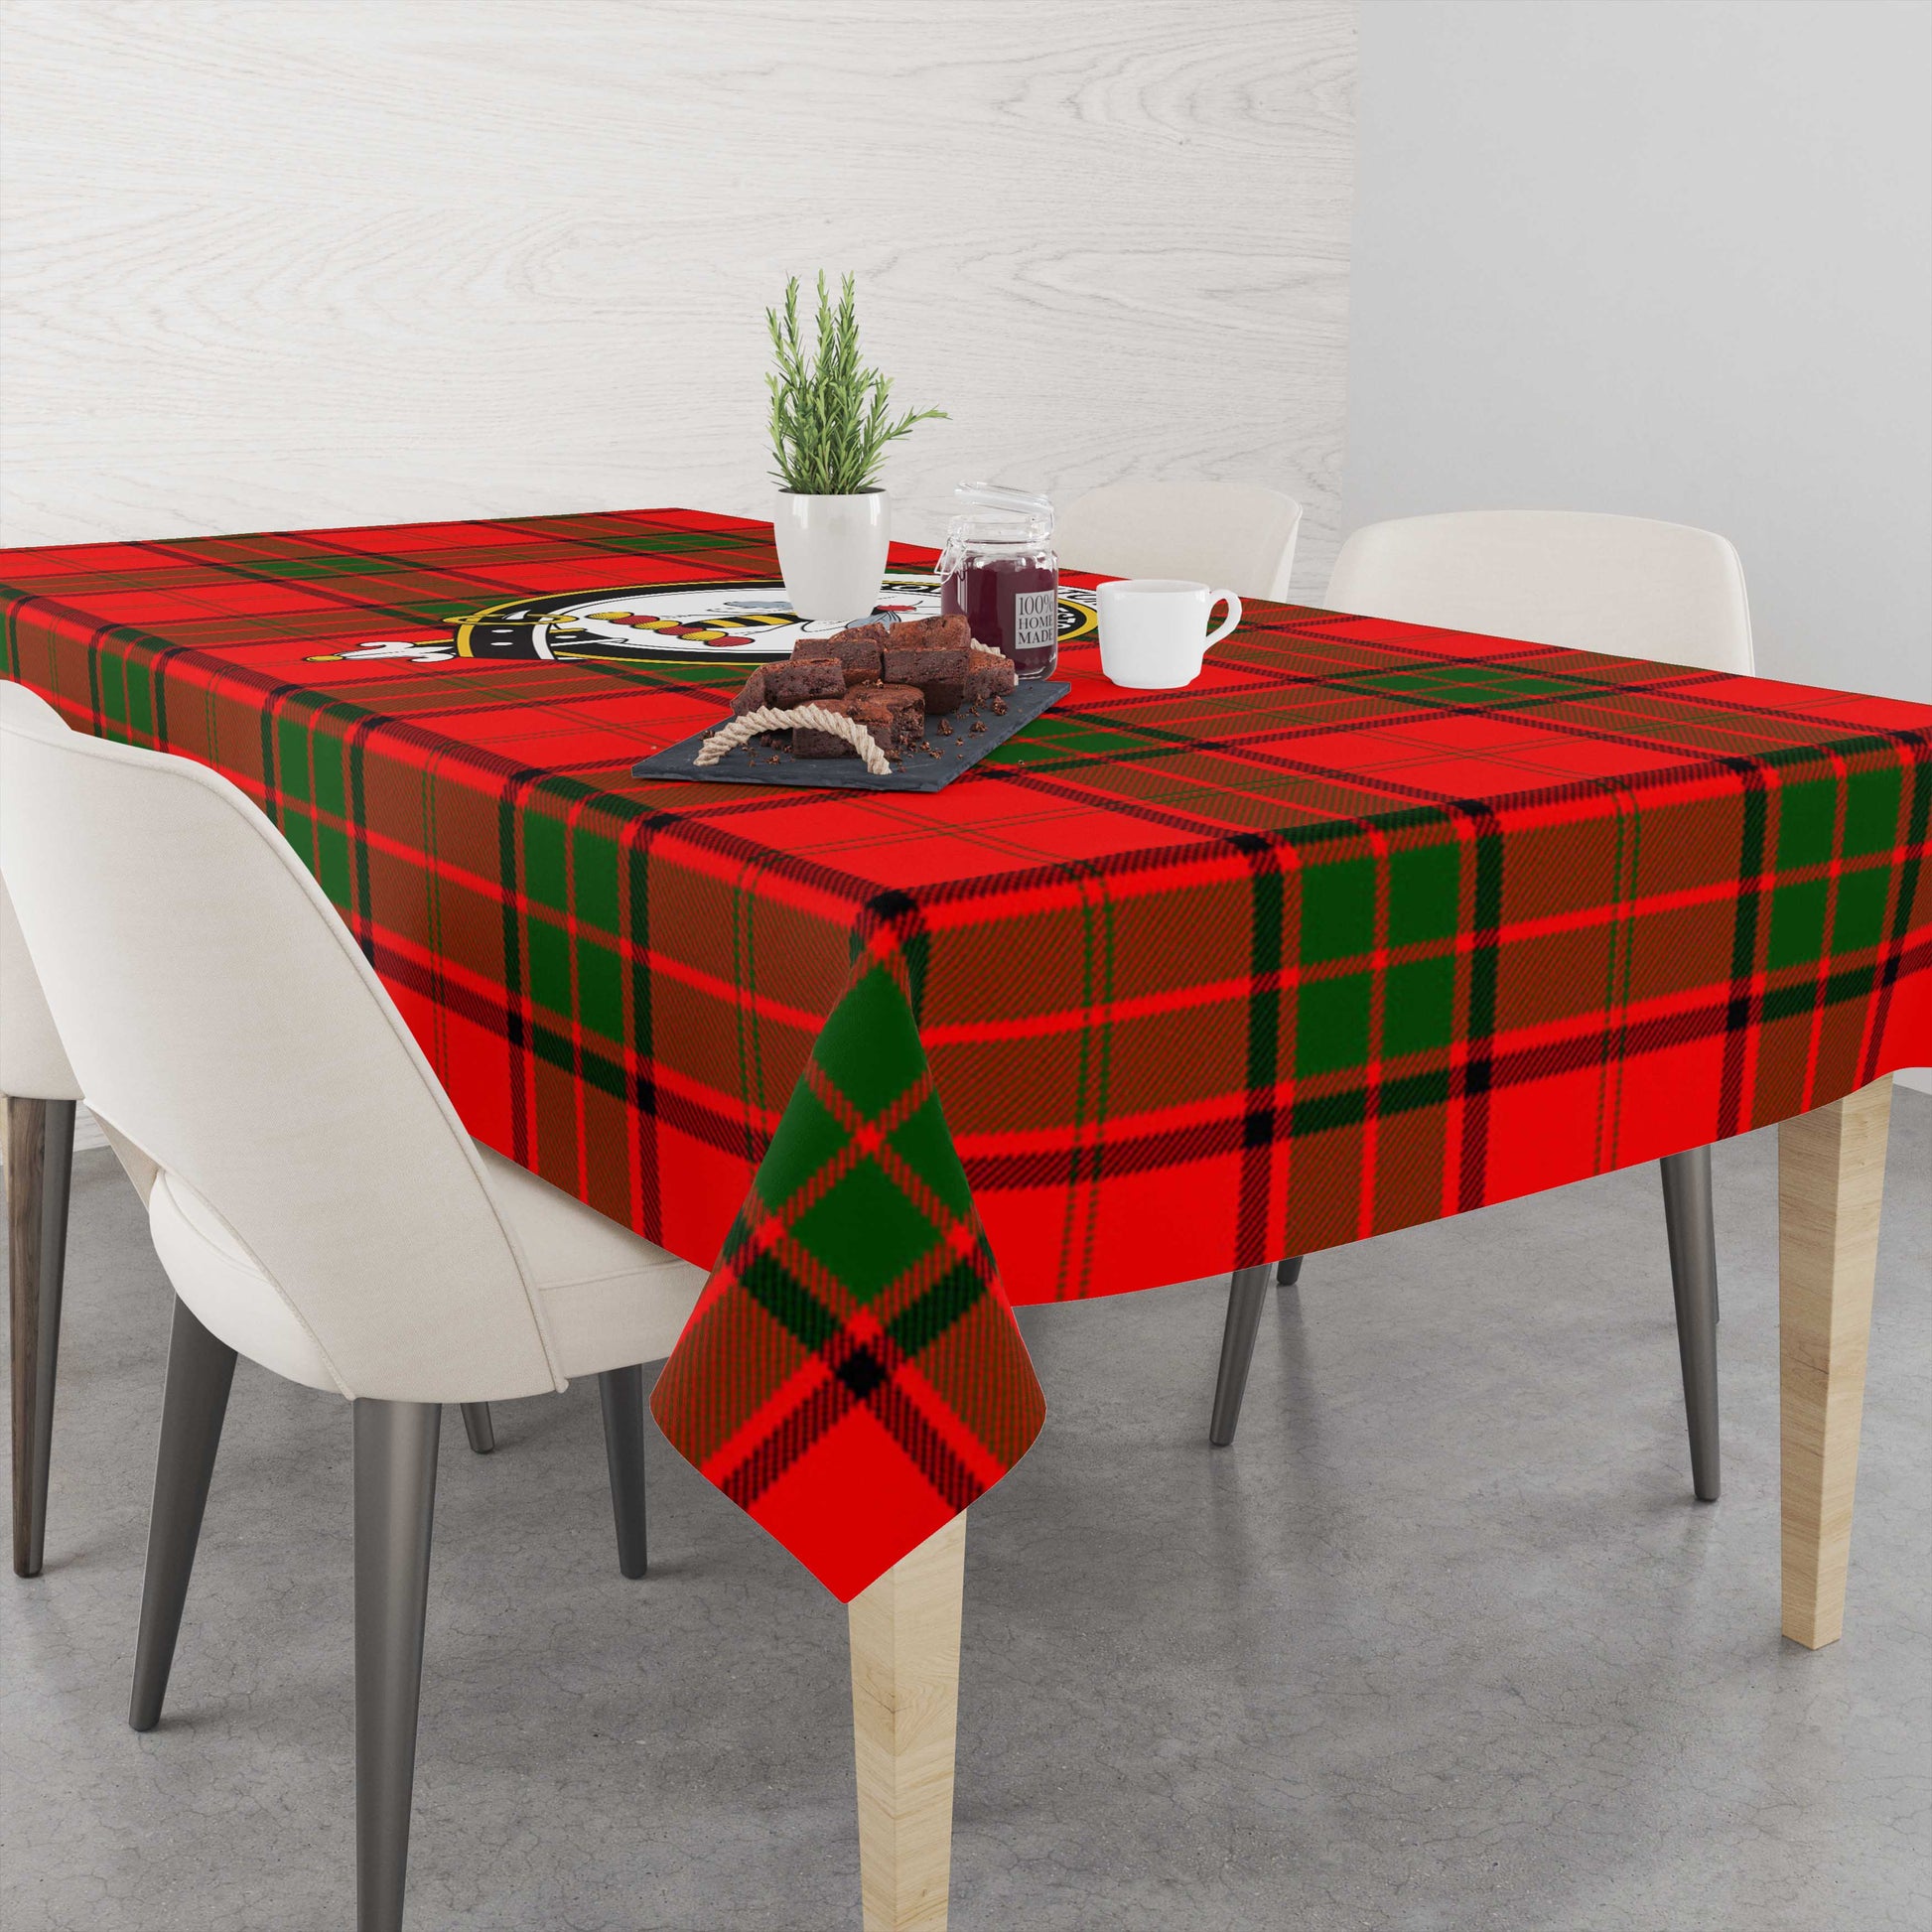 maxtone-tatan-tablecloth-with-family-crest